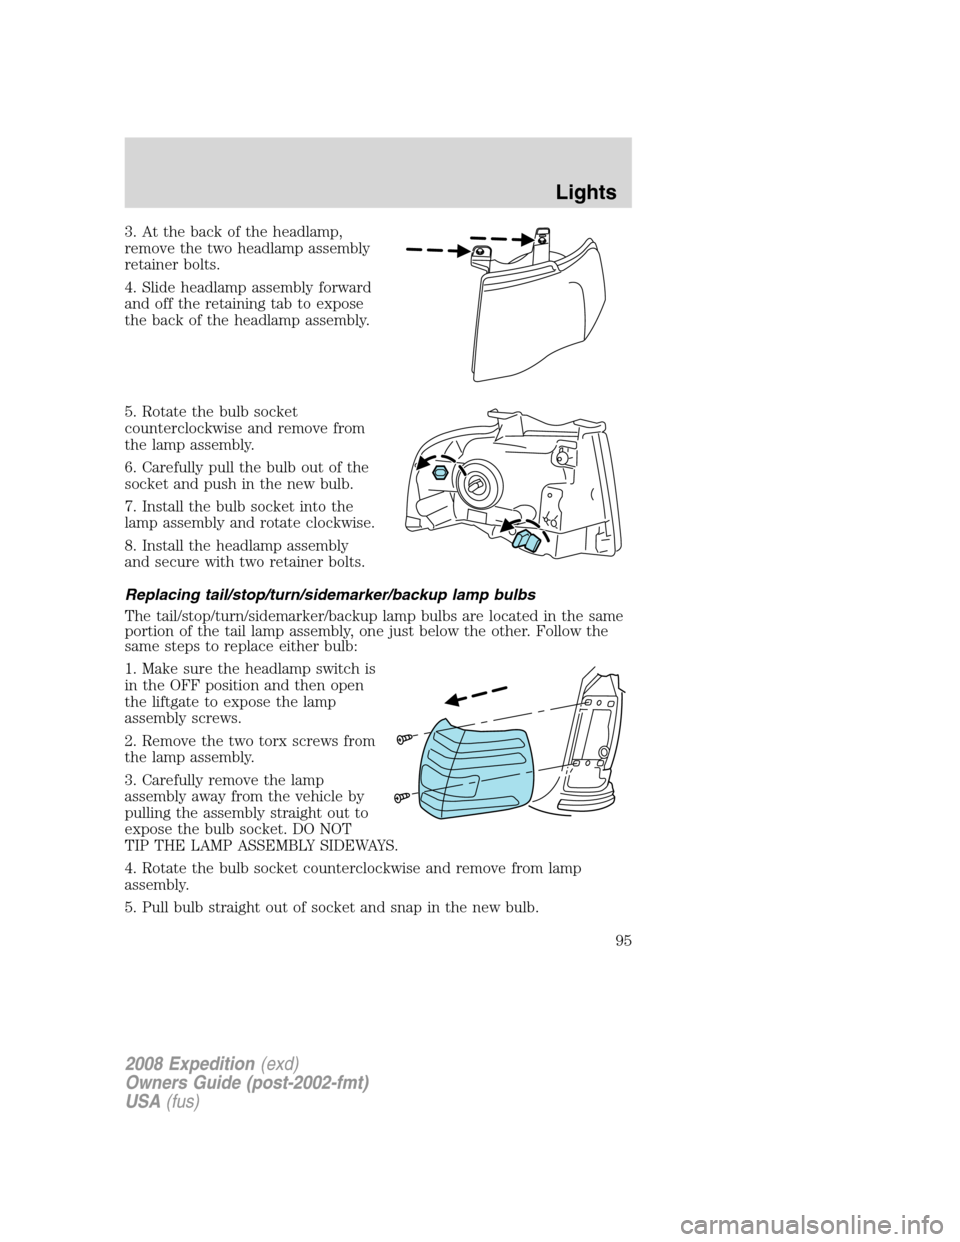 FORD EXPEDITION 2008 3.G Owners Manual 3. At the back of the headlamp,
remove the two headlamp assembly
retainer bolts.
4. Slide headlamp assembly forward
and off the retaining tab to expose
the back of the headlamp assembly.
5. Rotate the